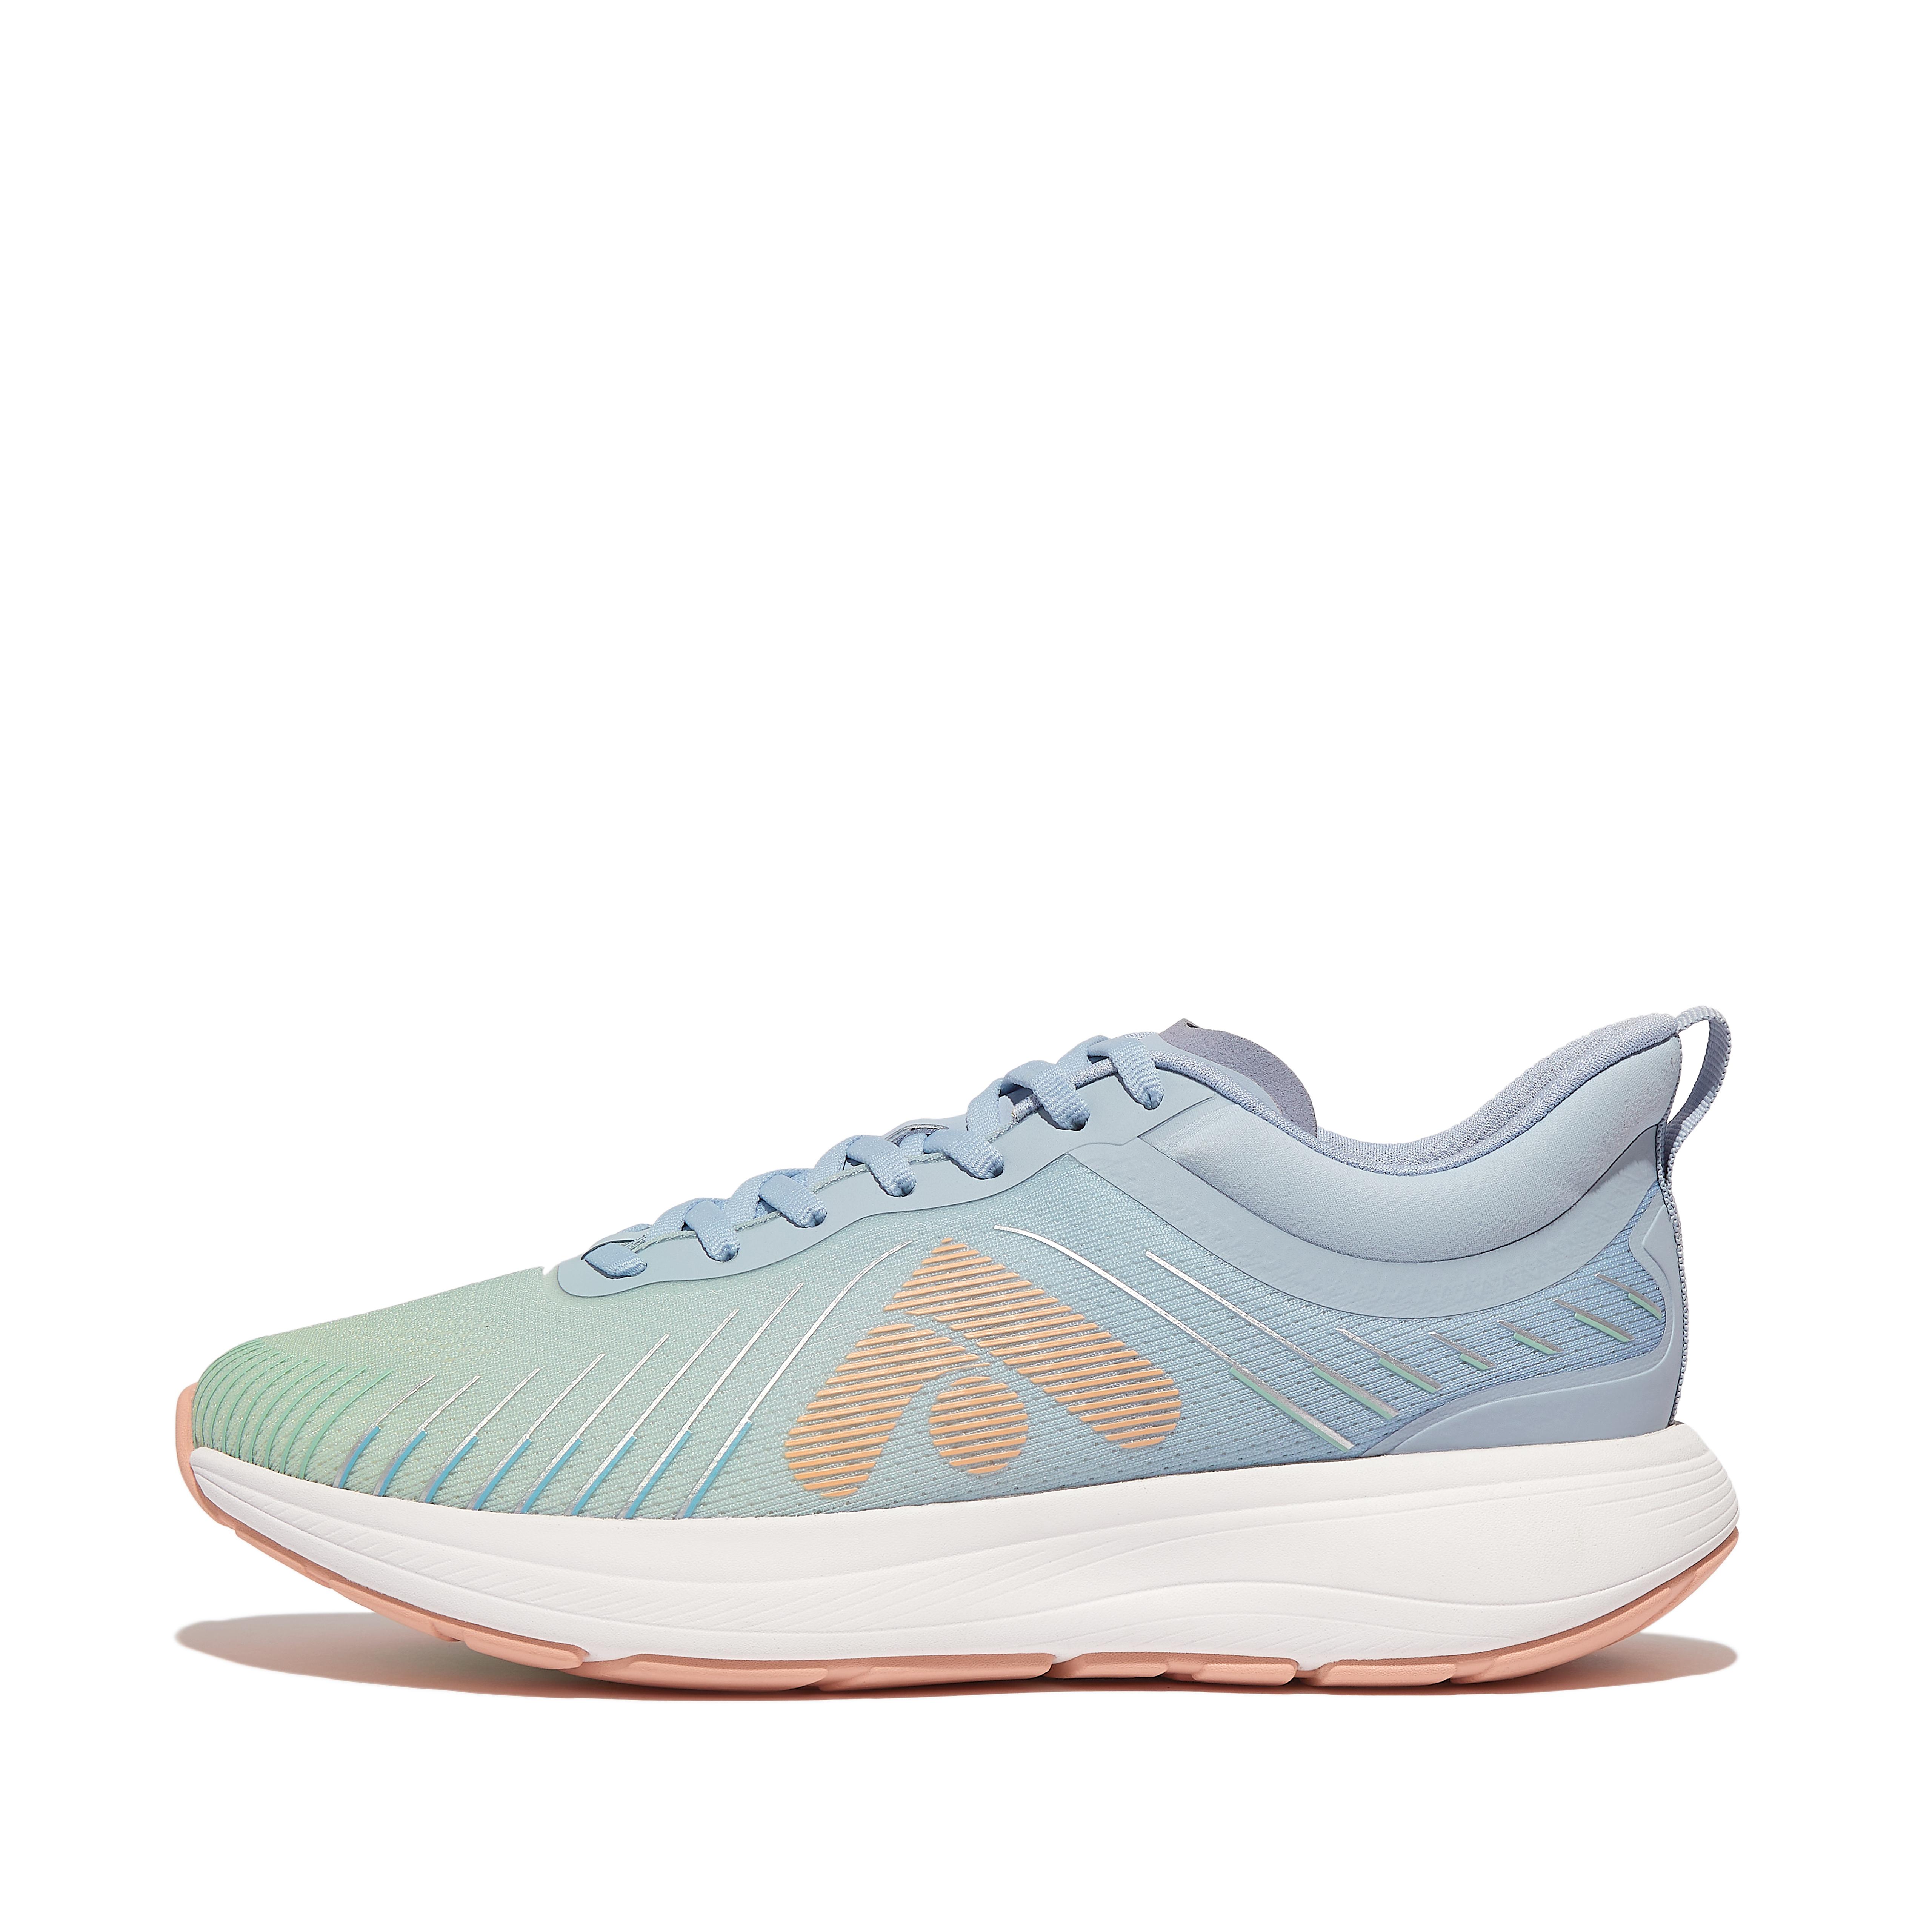 Fitflop Ombre-Edition Mesh Running/Sports Sneakers,skywash-blue/sagebrush-blushy